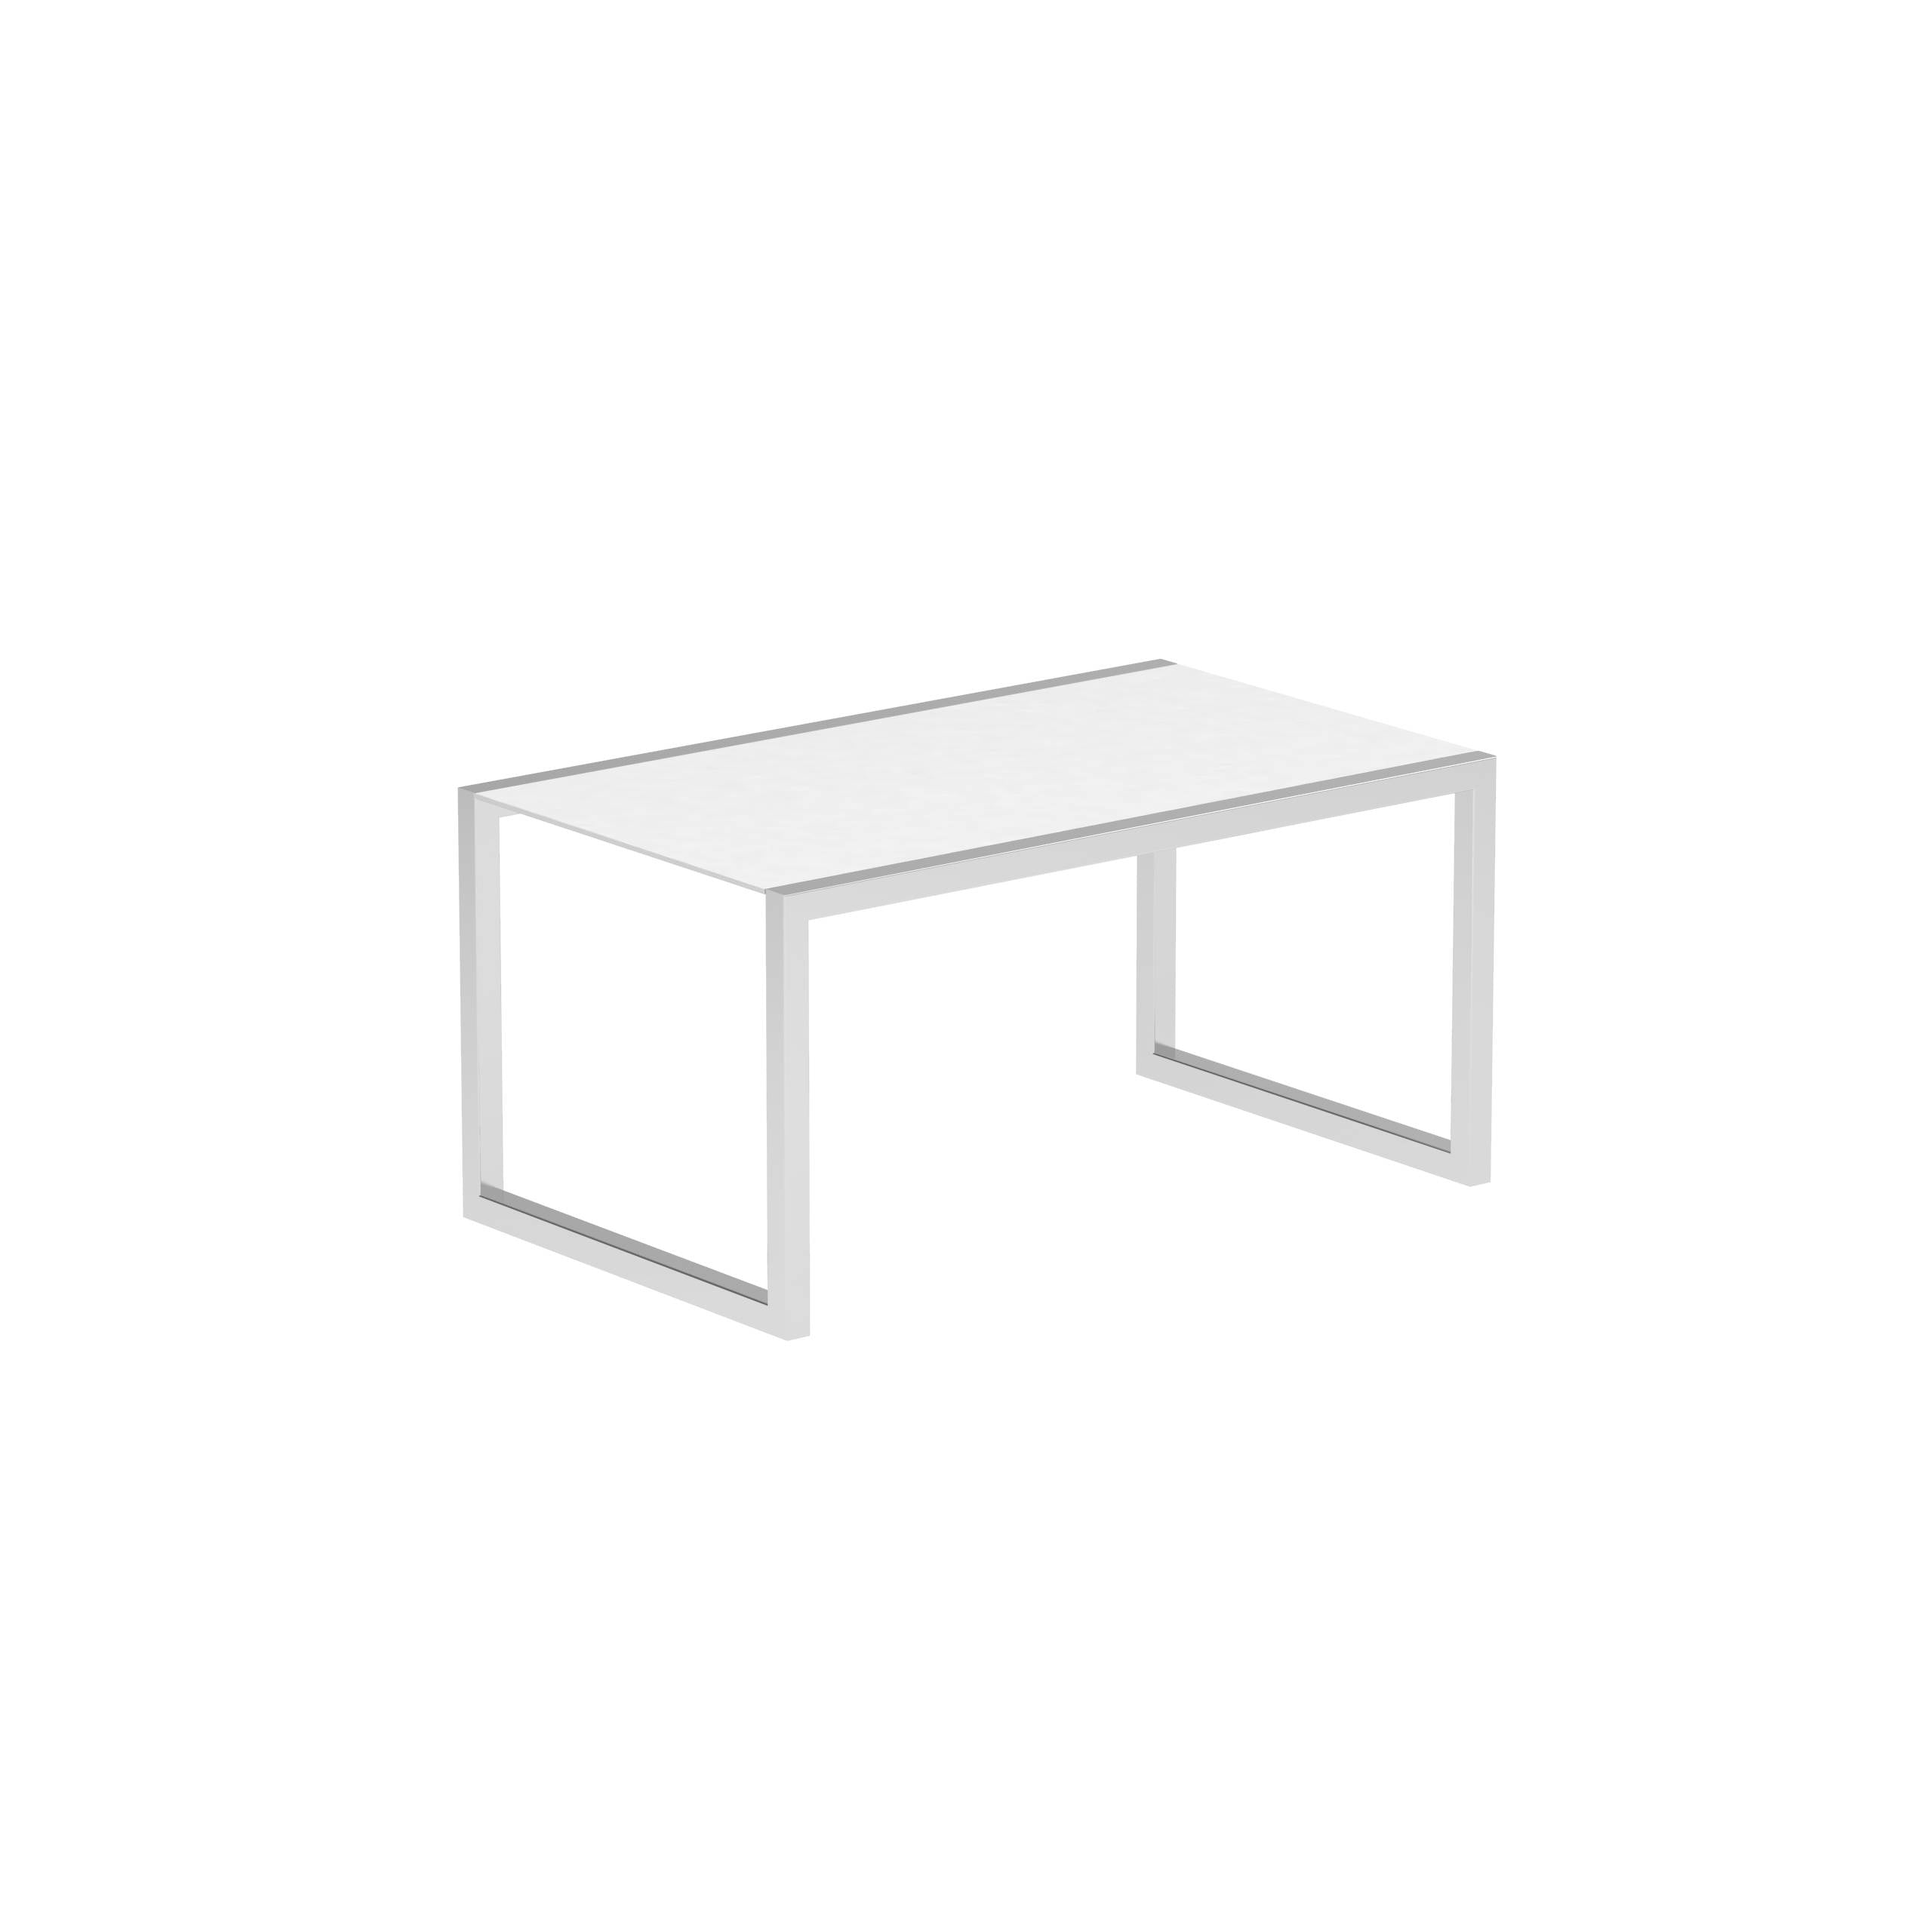 Ninix Table 150x90 Cm With Stainless Steel El.Pol And Ceramic Top White